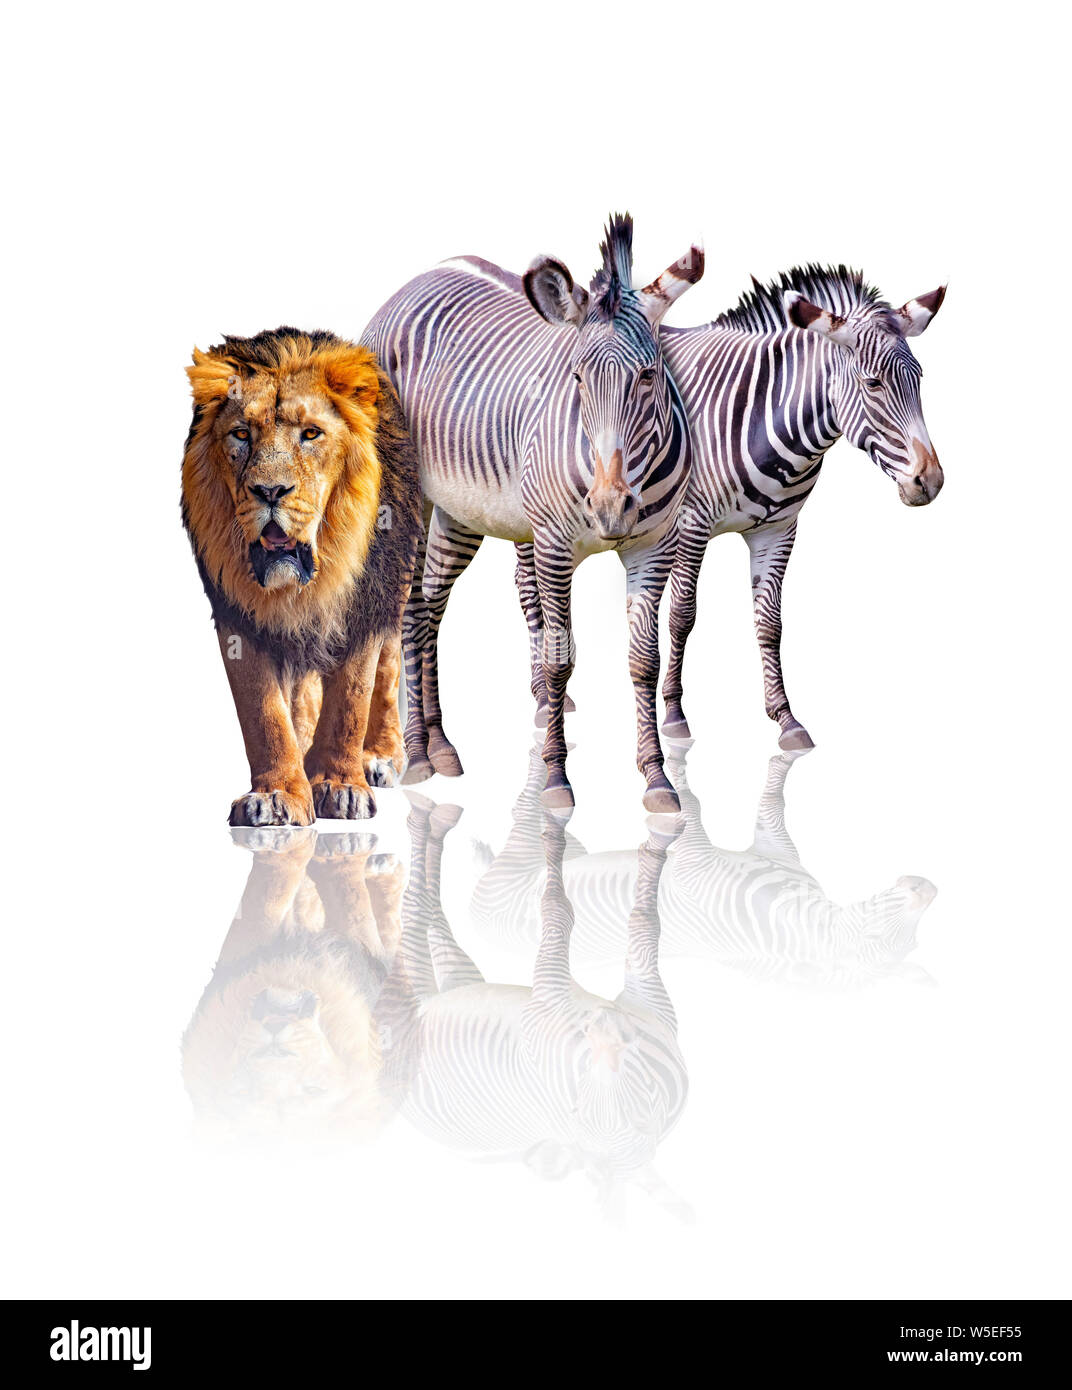 Zebras and lion isolated on the white background. It reflects their image. They are african animals. Stock Photo